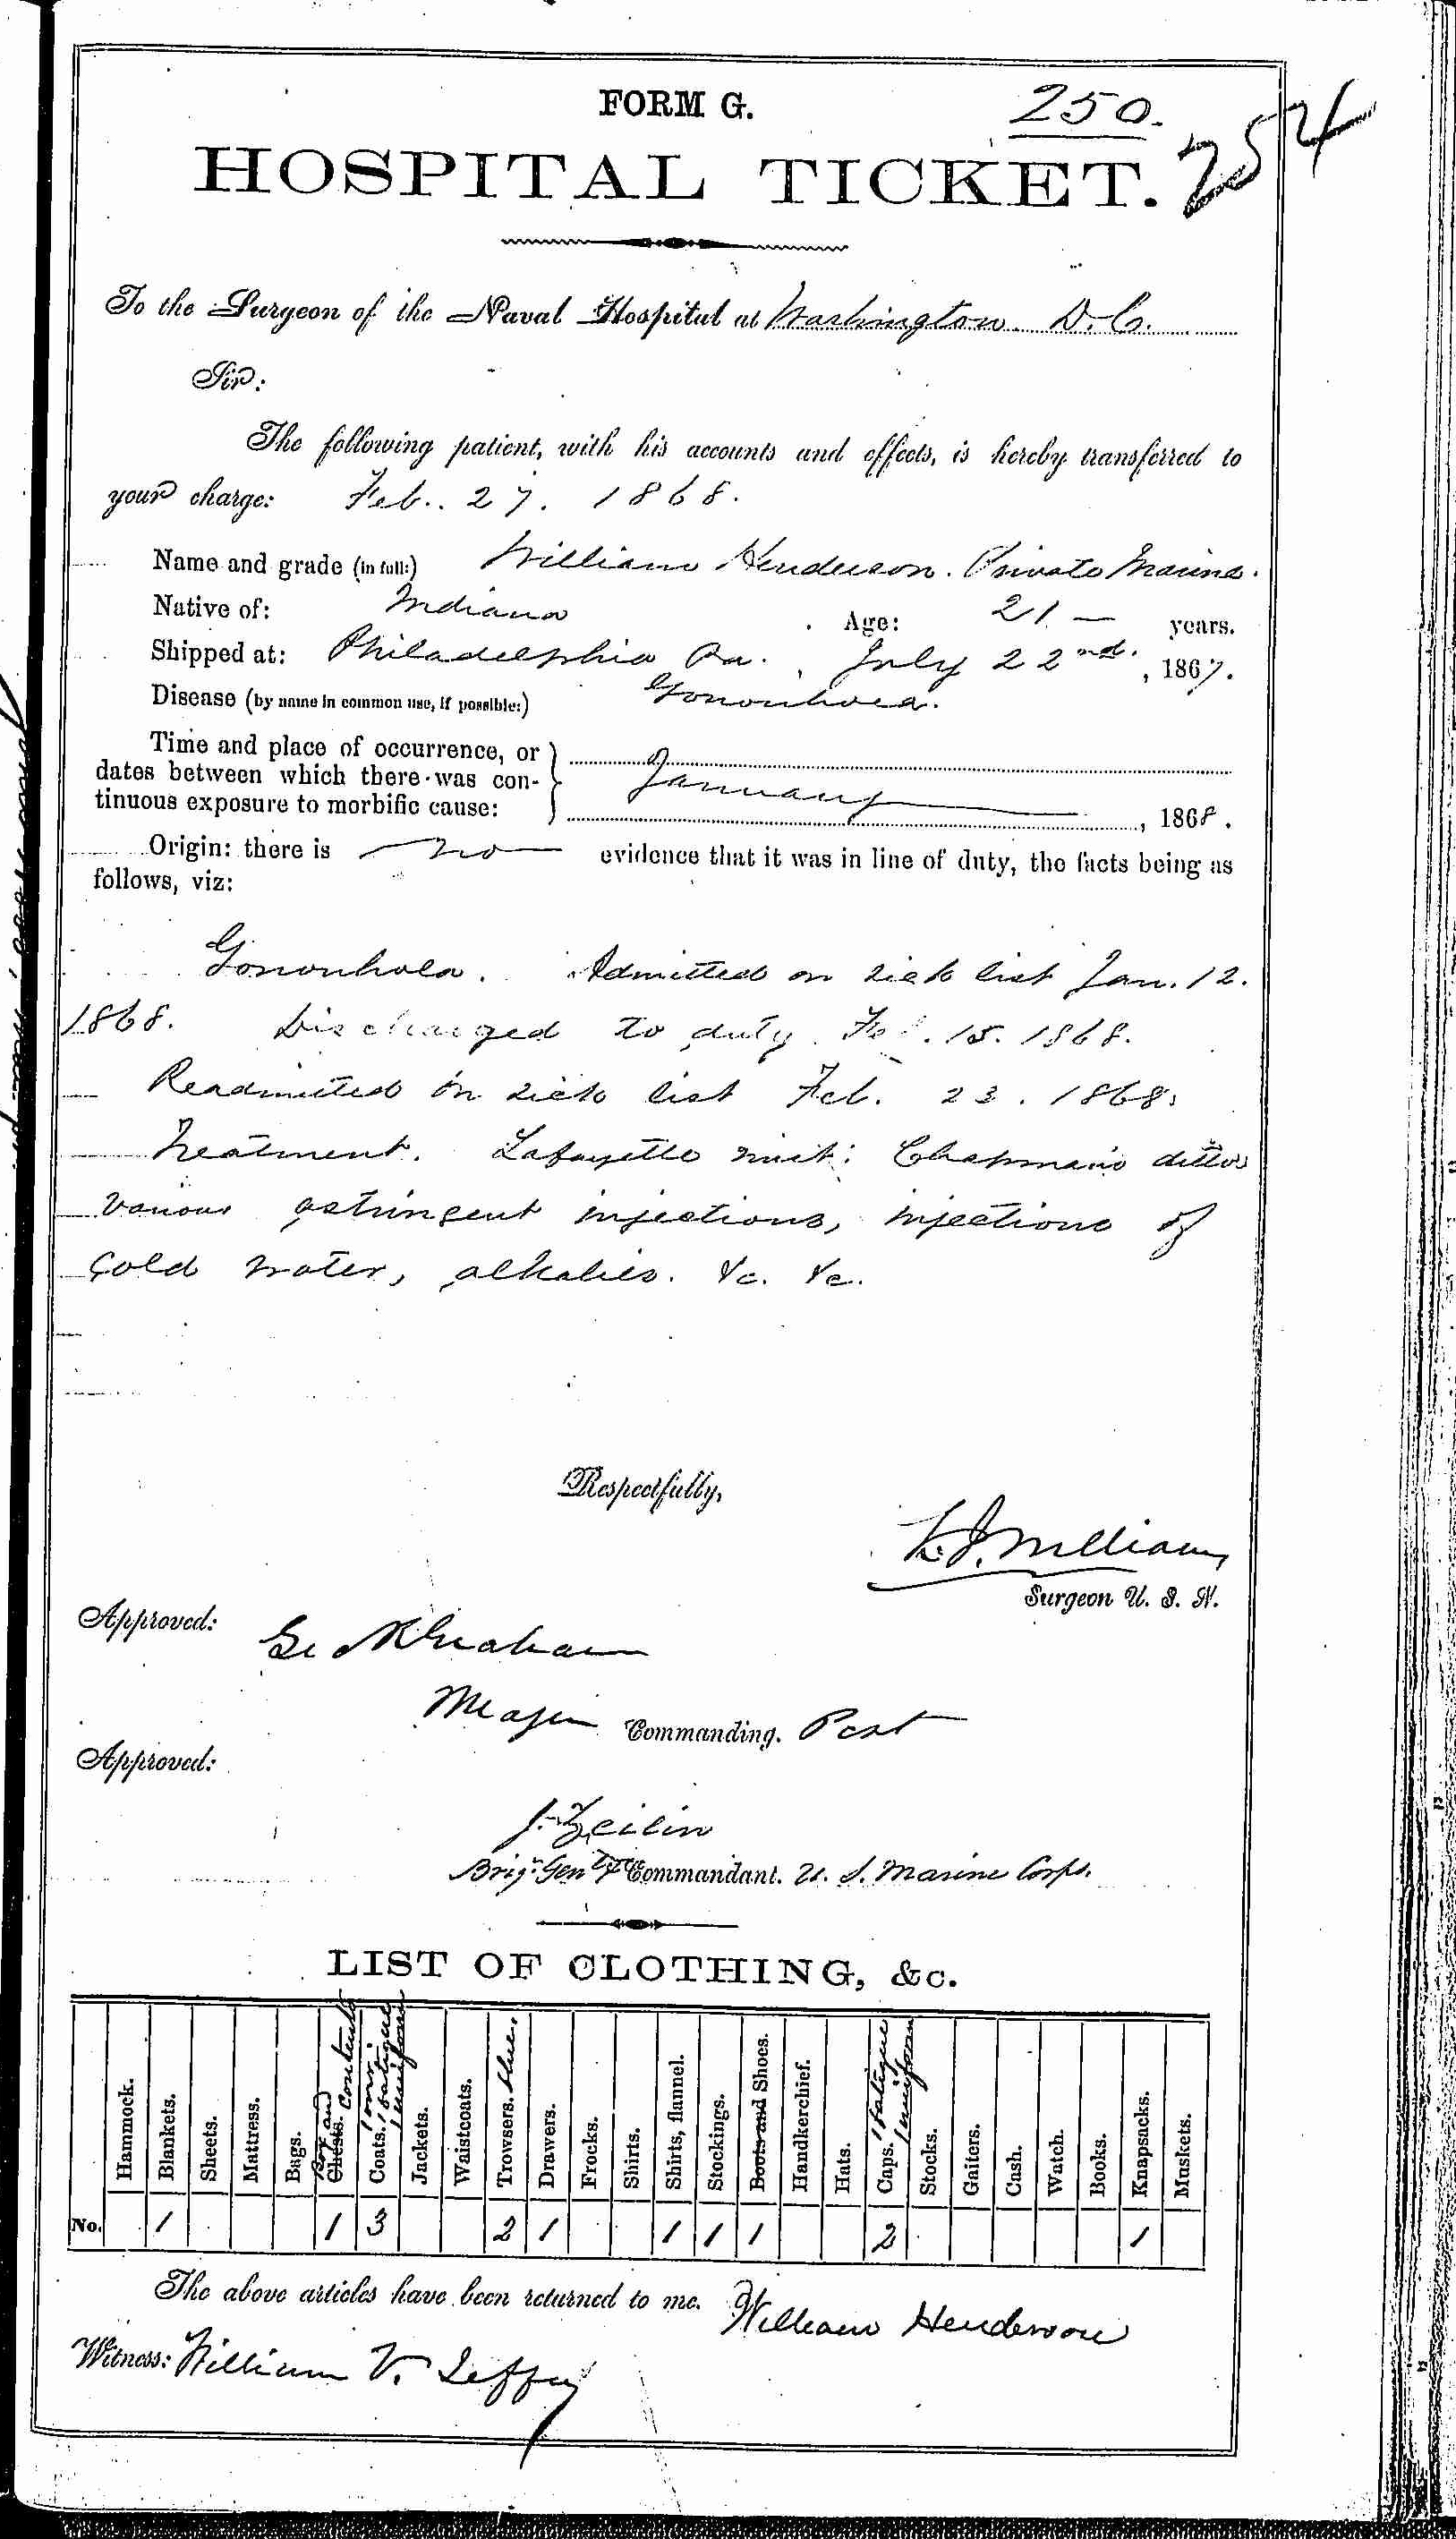 Entry for William Henderson (page 1 of 2) in the log Hospital Tickets and Case Papers - Naval Hospital - Washington, D.C. - 1866-68